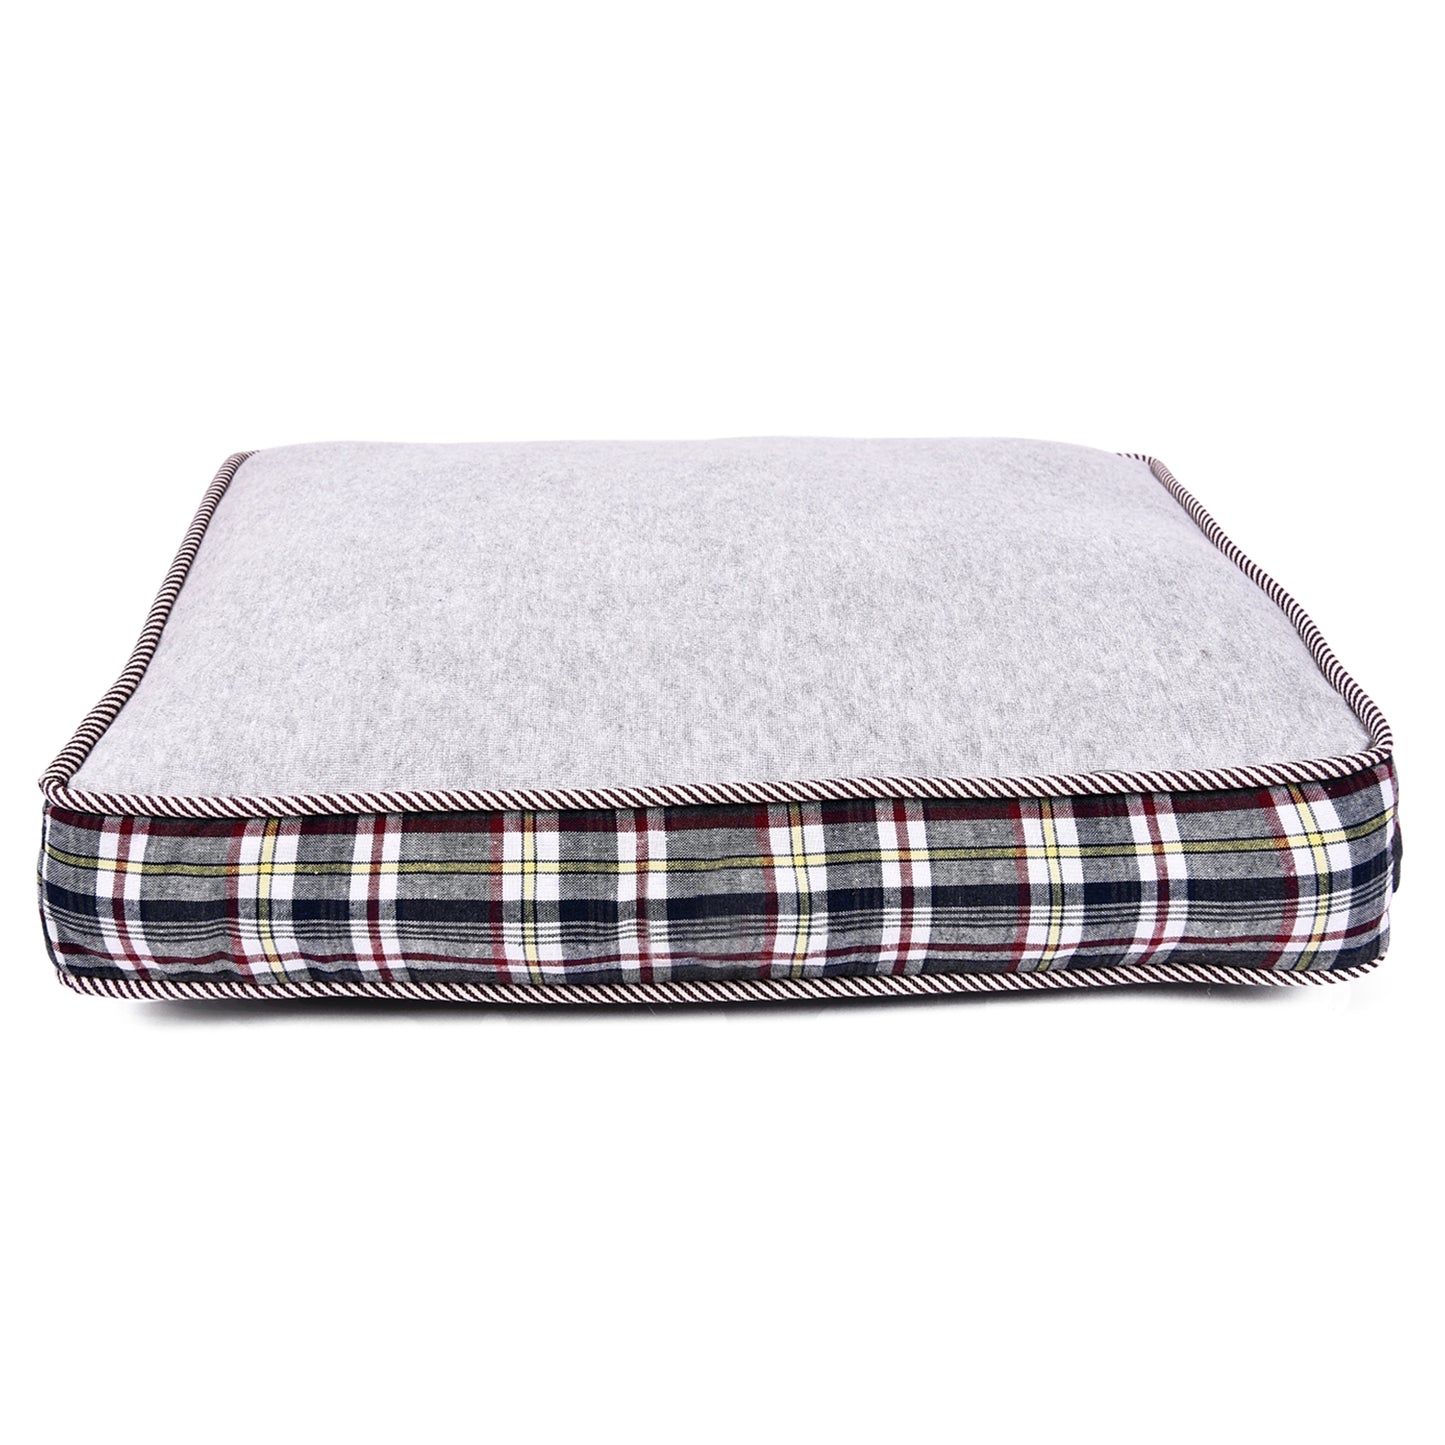 Royalty Pets DPD-005S.490: Dog Bed - Cooper (Small)